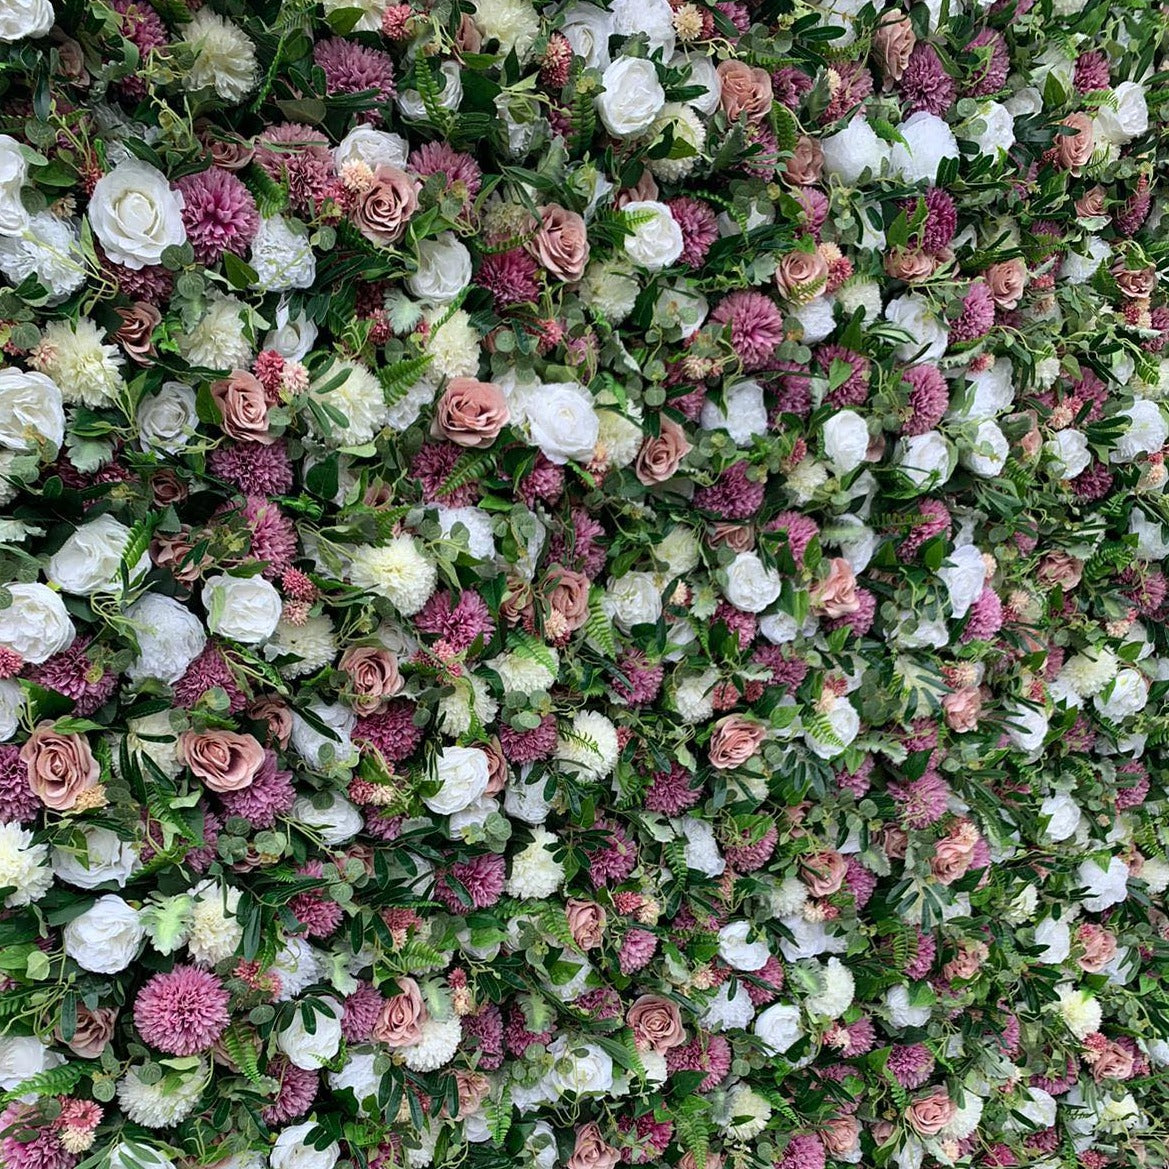 Flower Walls and Shimmer Walls